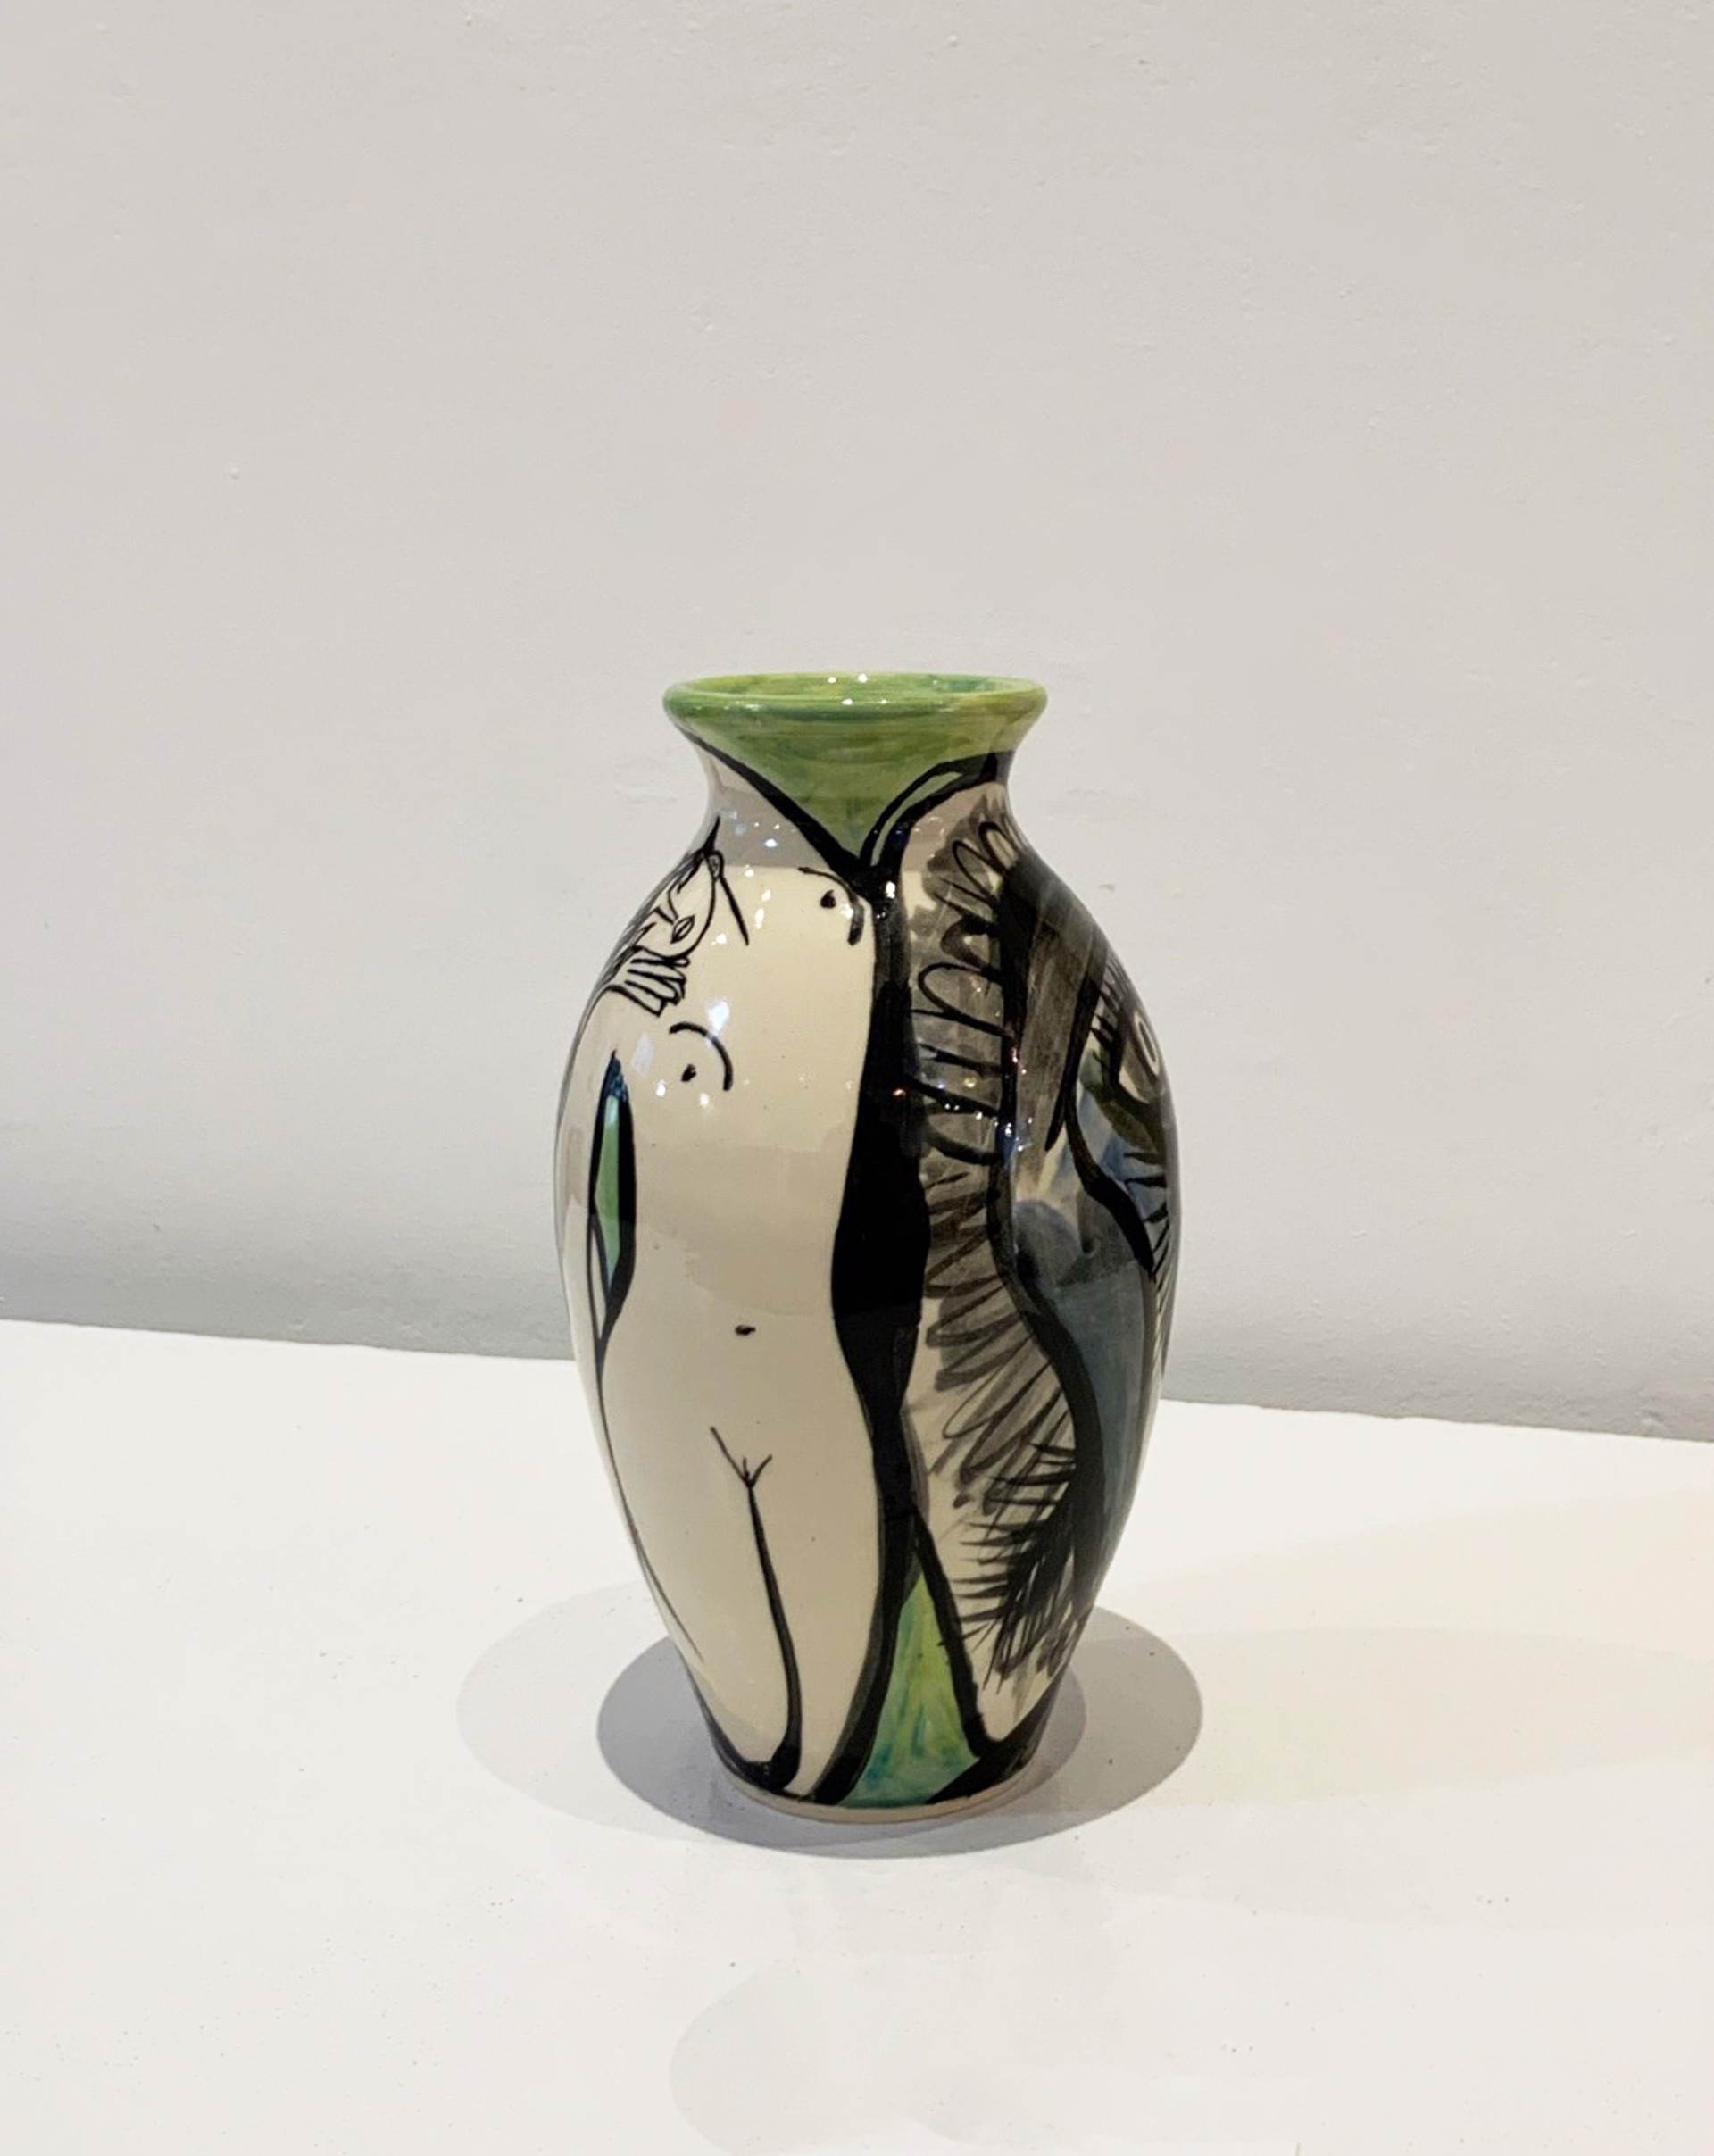 Face Vase #7 by Ken and Tina Riesterer